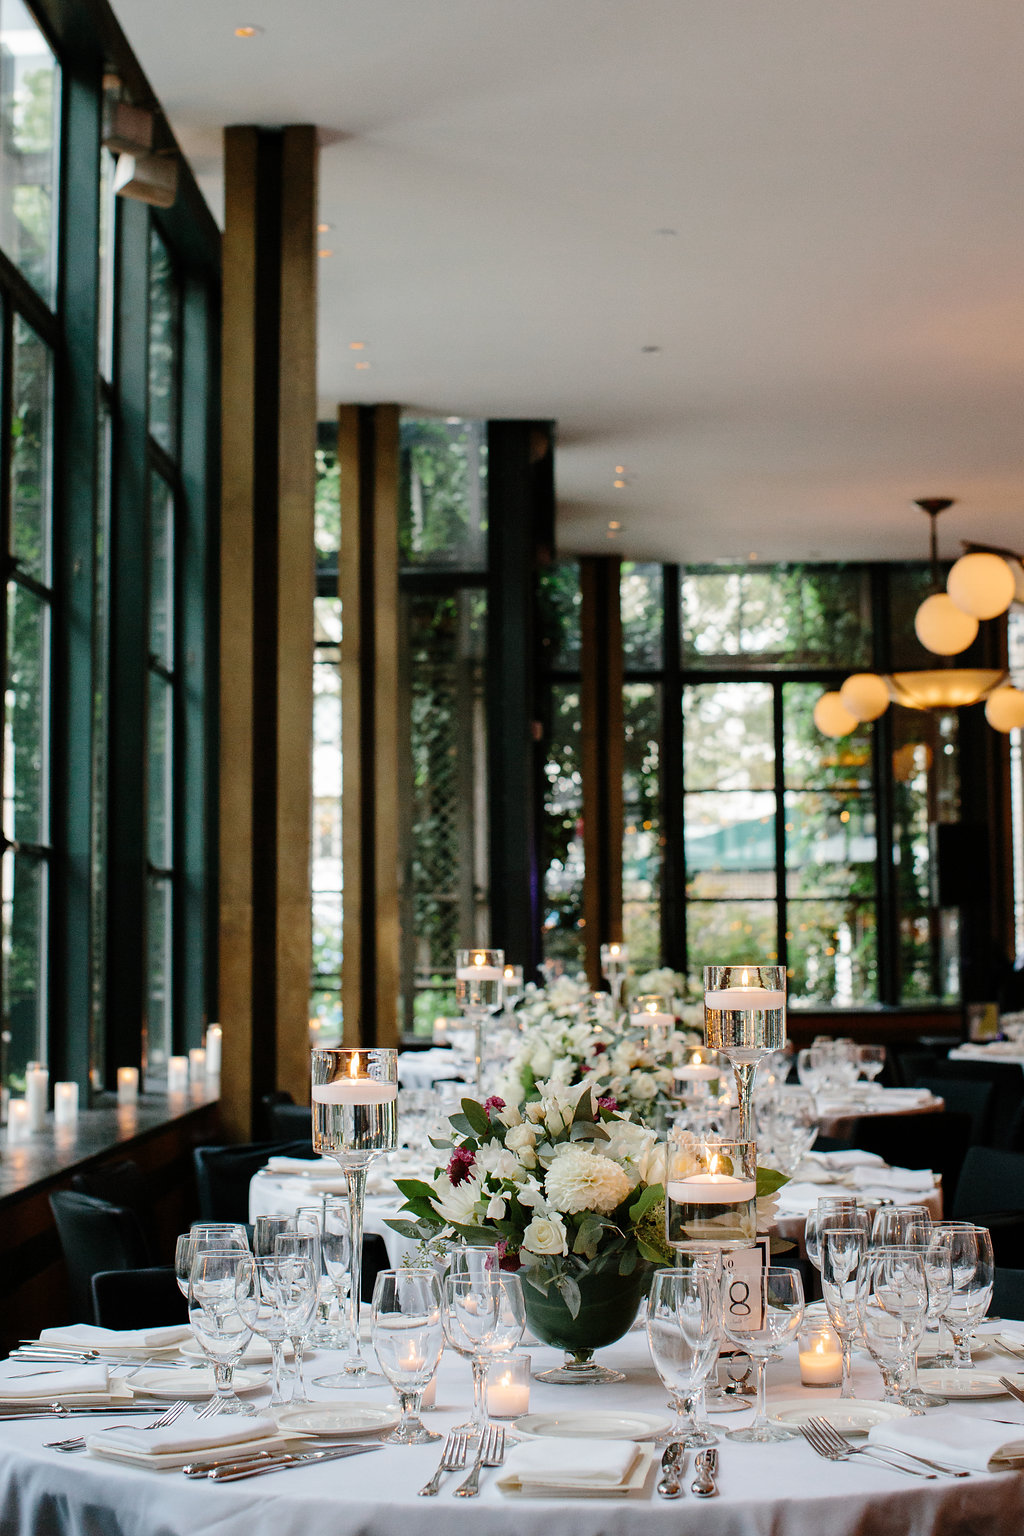  Photography:  Vik Photography   Planning:  Dawn Mauberret Events   Venue:  Bryant Park Grill  